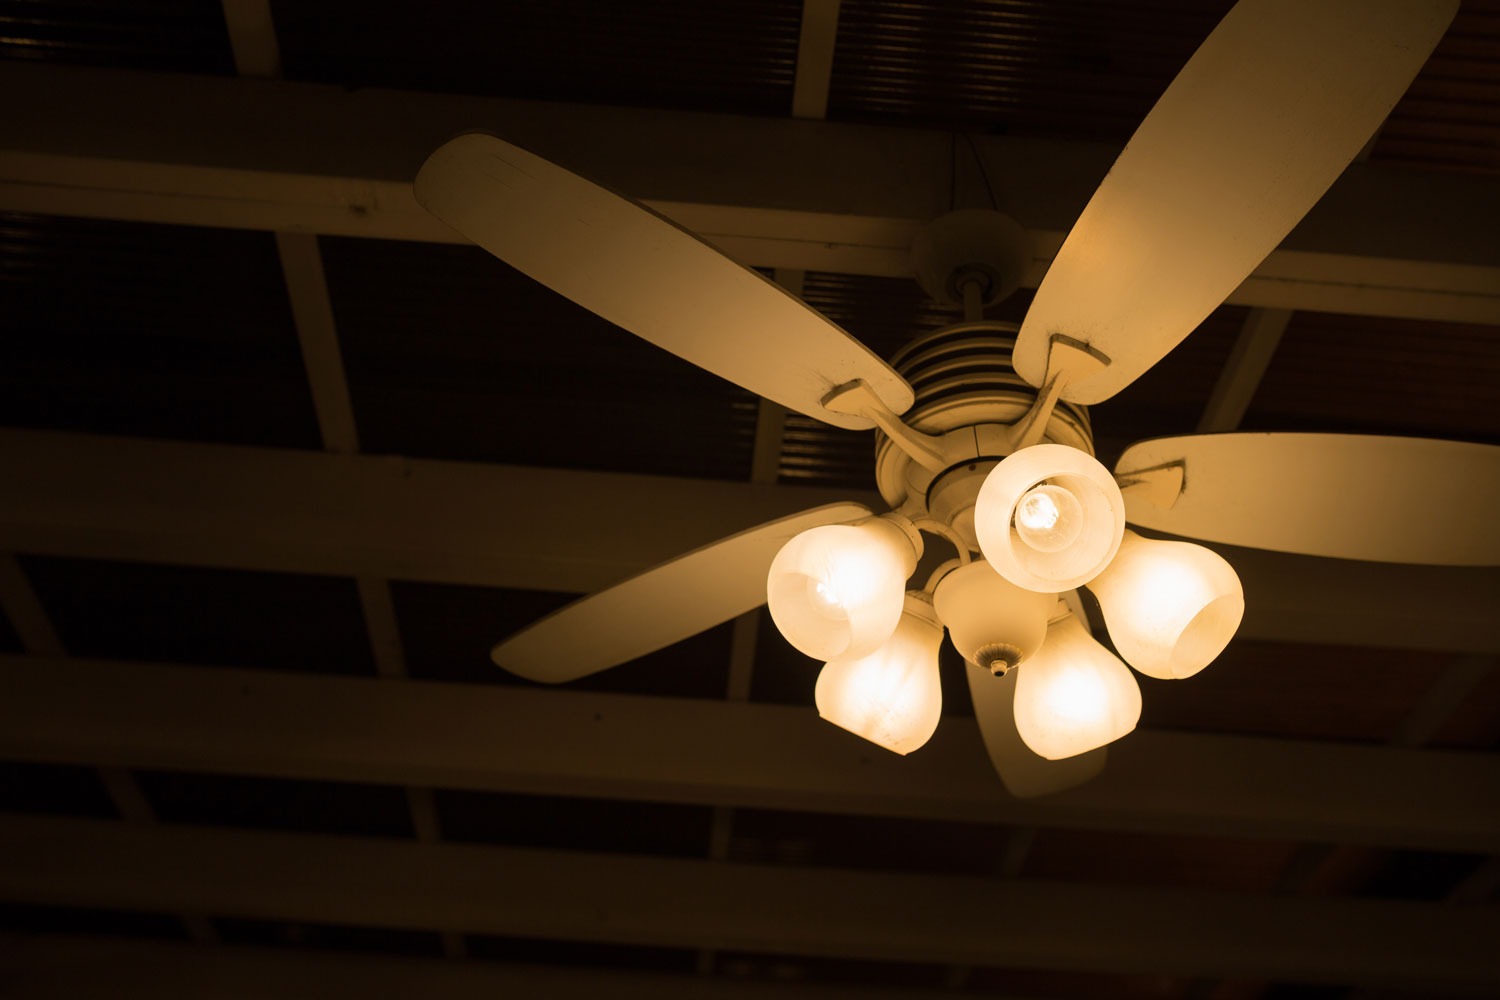 A dark room and ceiling fan lights turned on